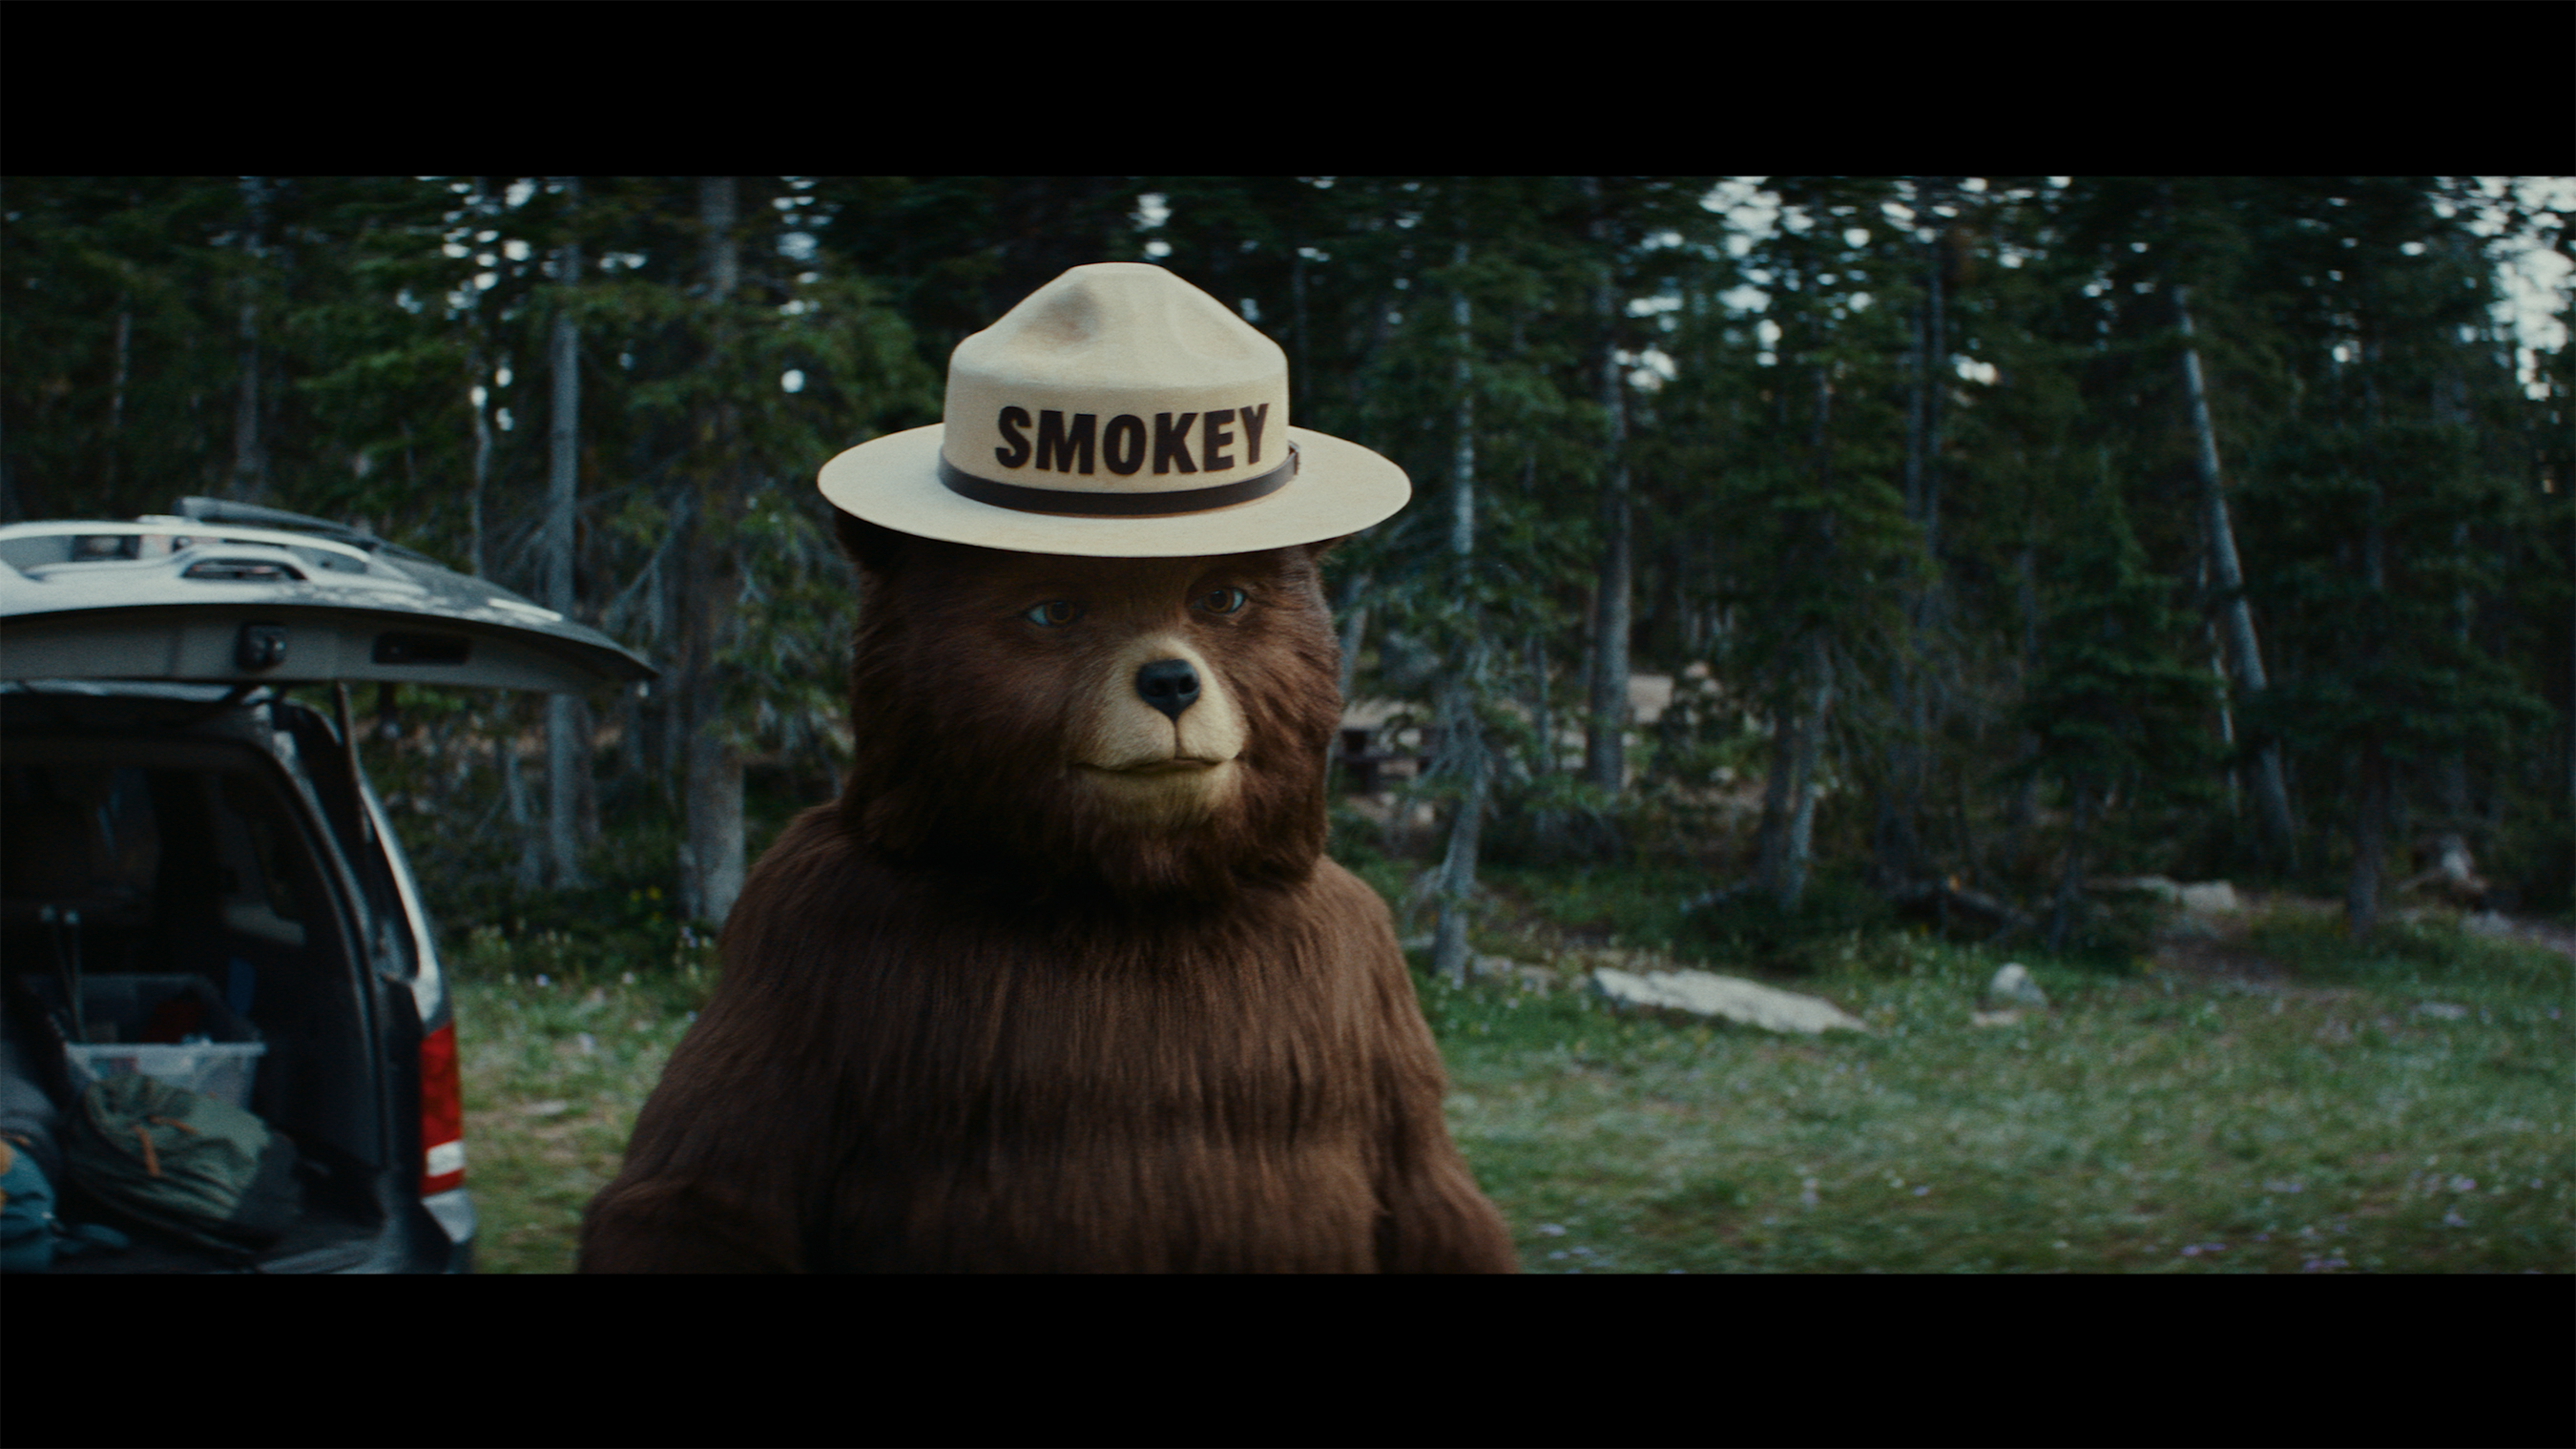 Smokey is Within